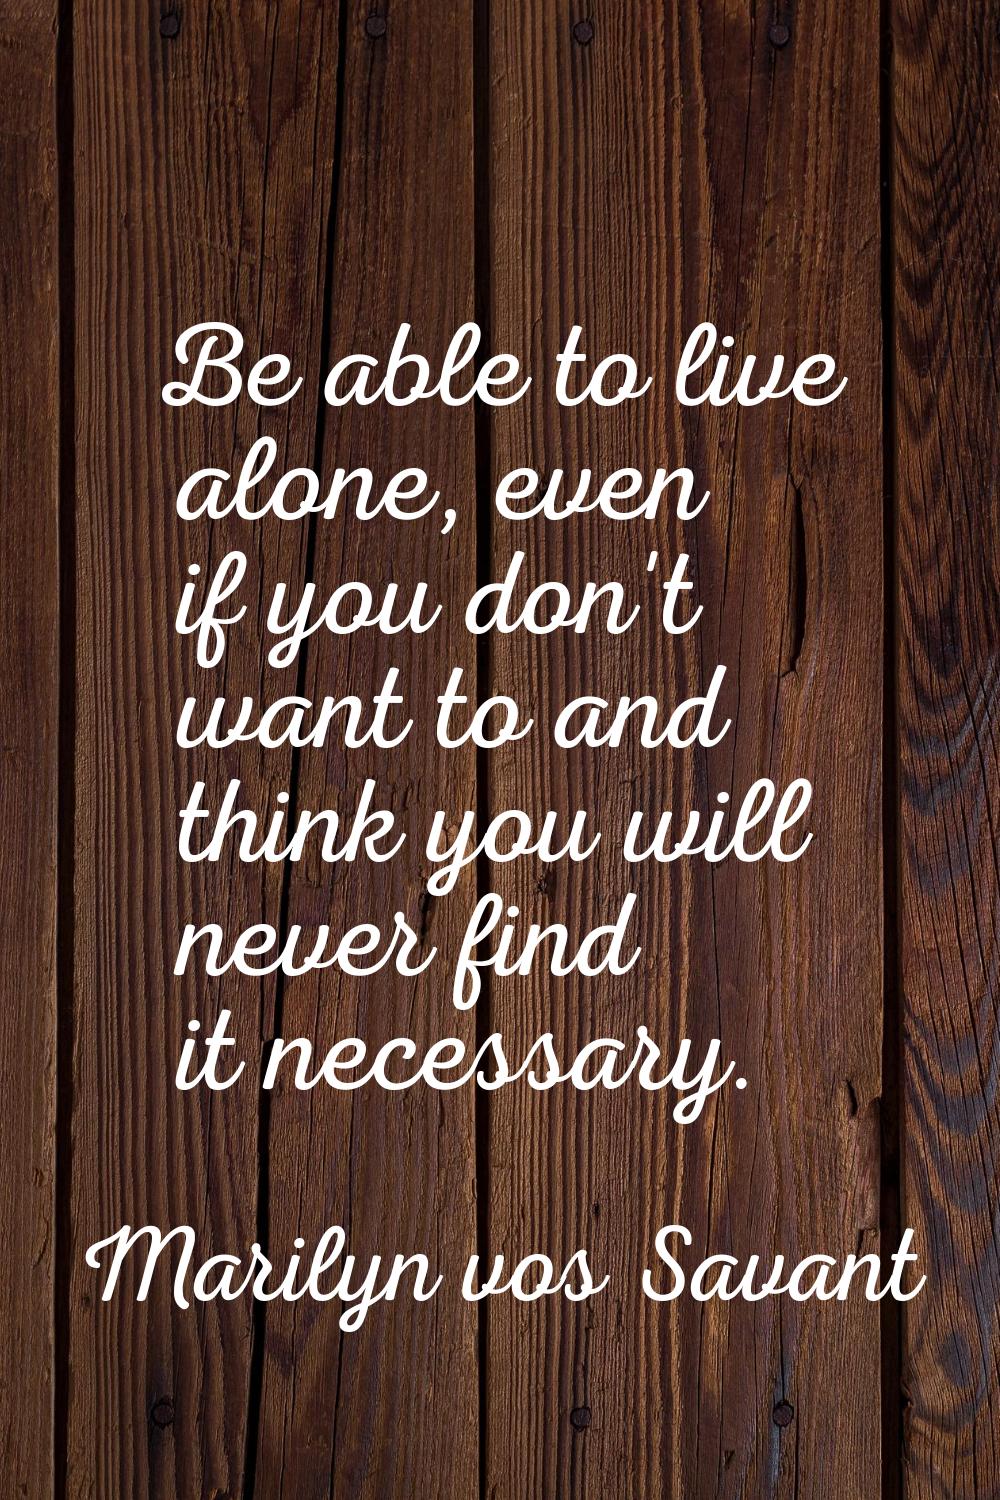 Be able to live alone, even if you don't want to and think you will never find it necessary.